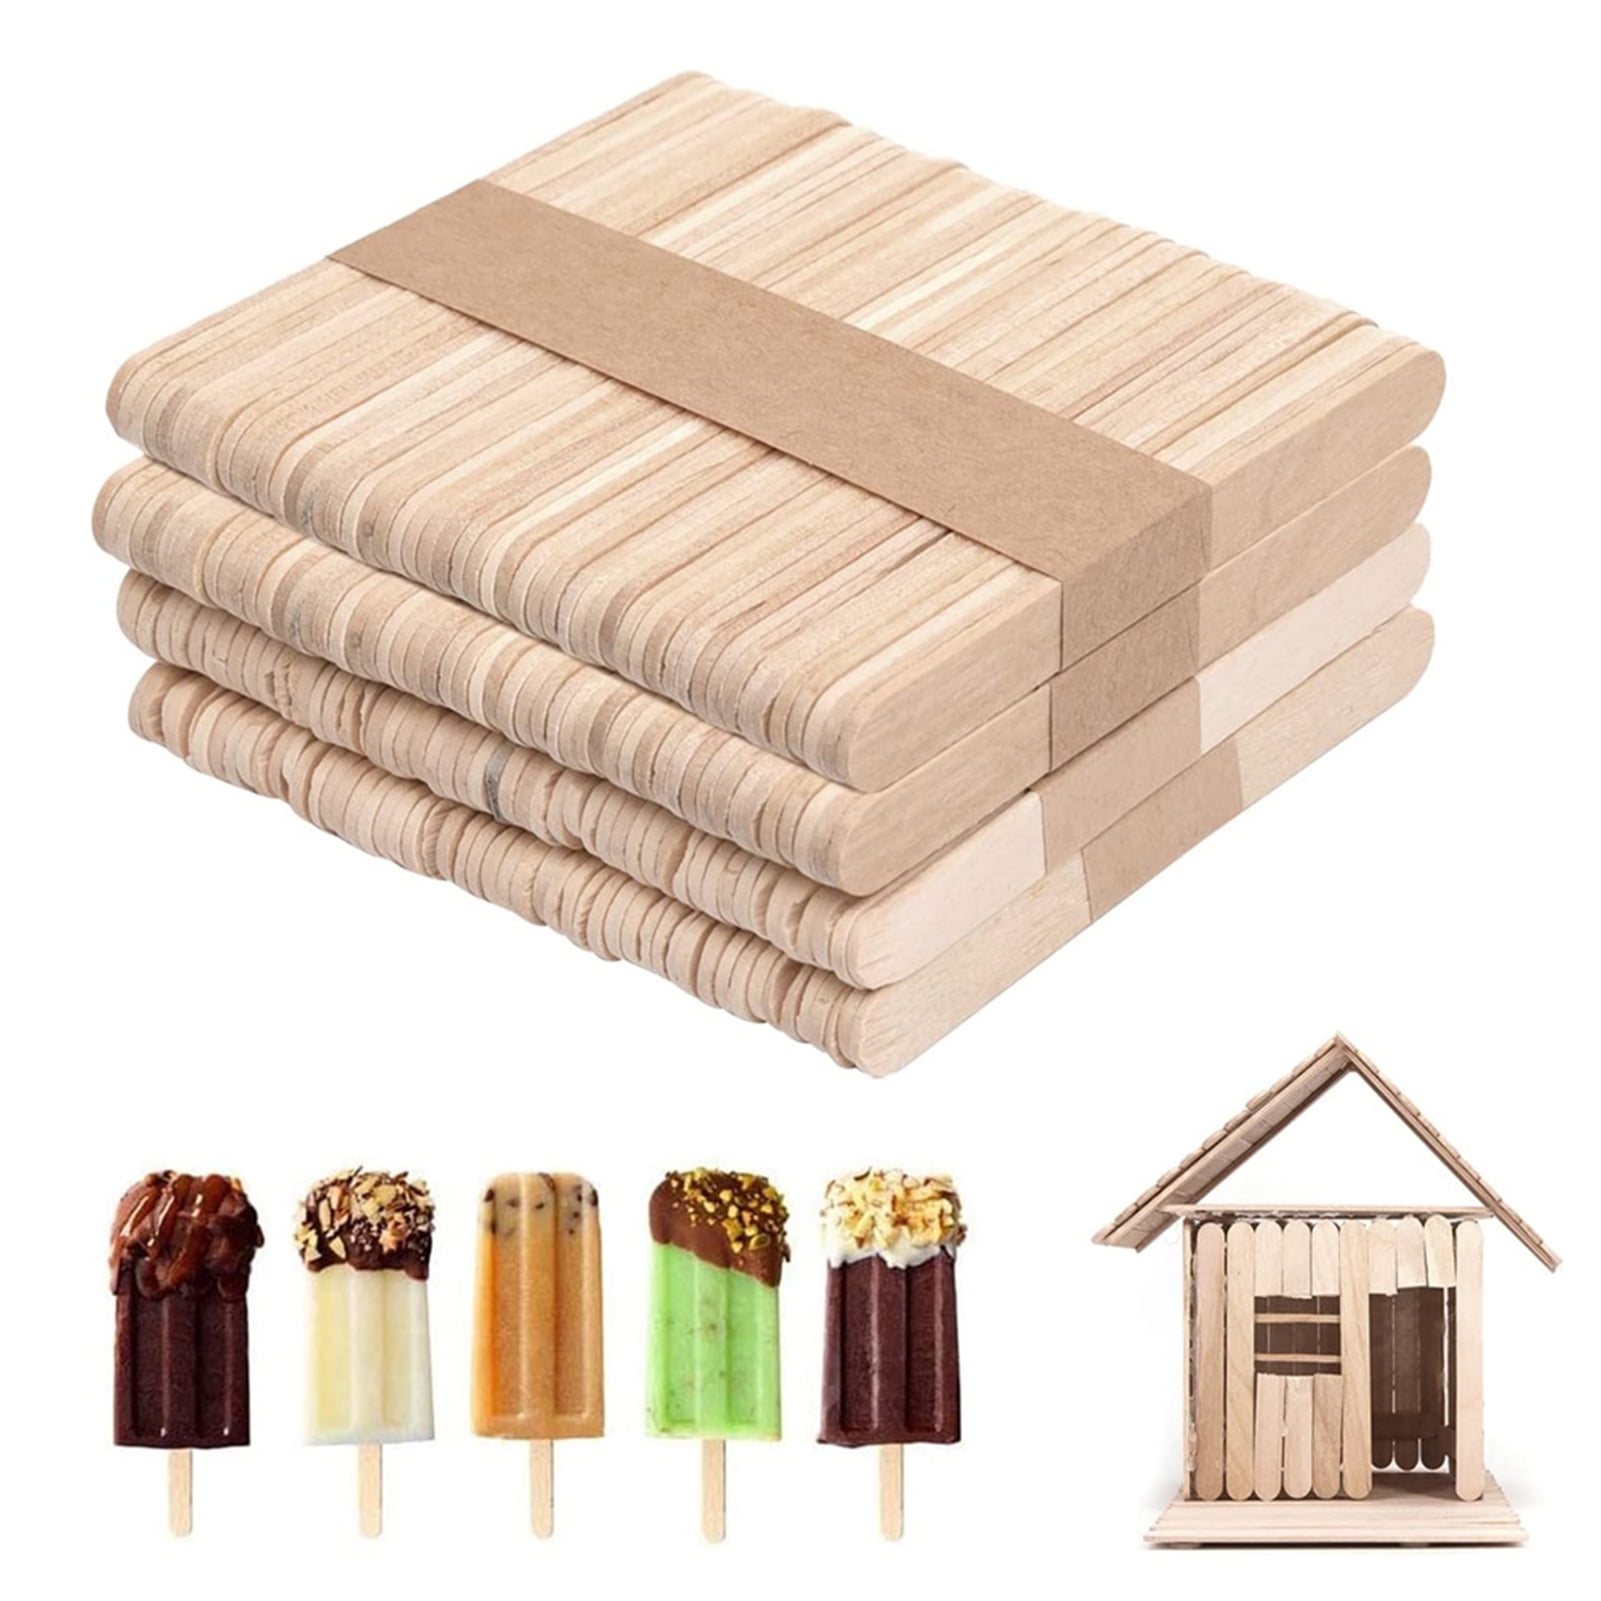 300 Pack Small Wooden Popsicle Sticks For Crafts, Bulk Small Wood